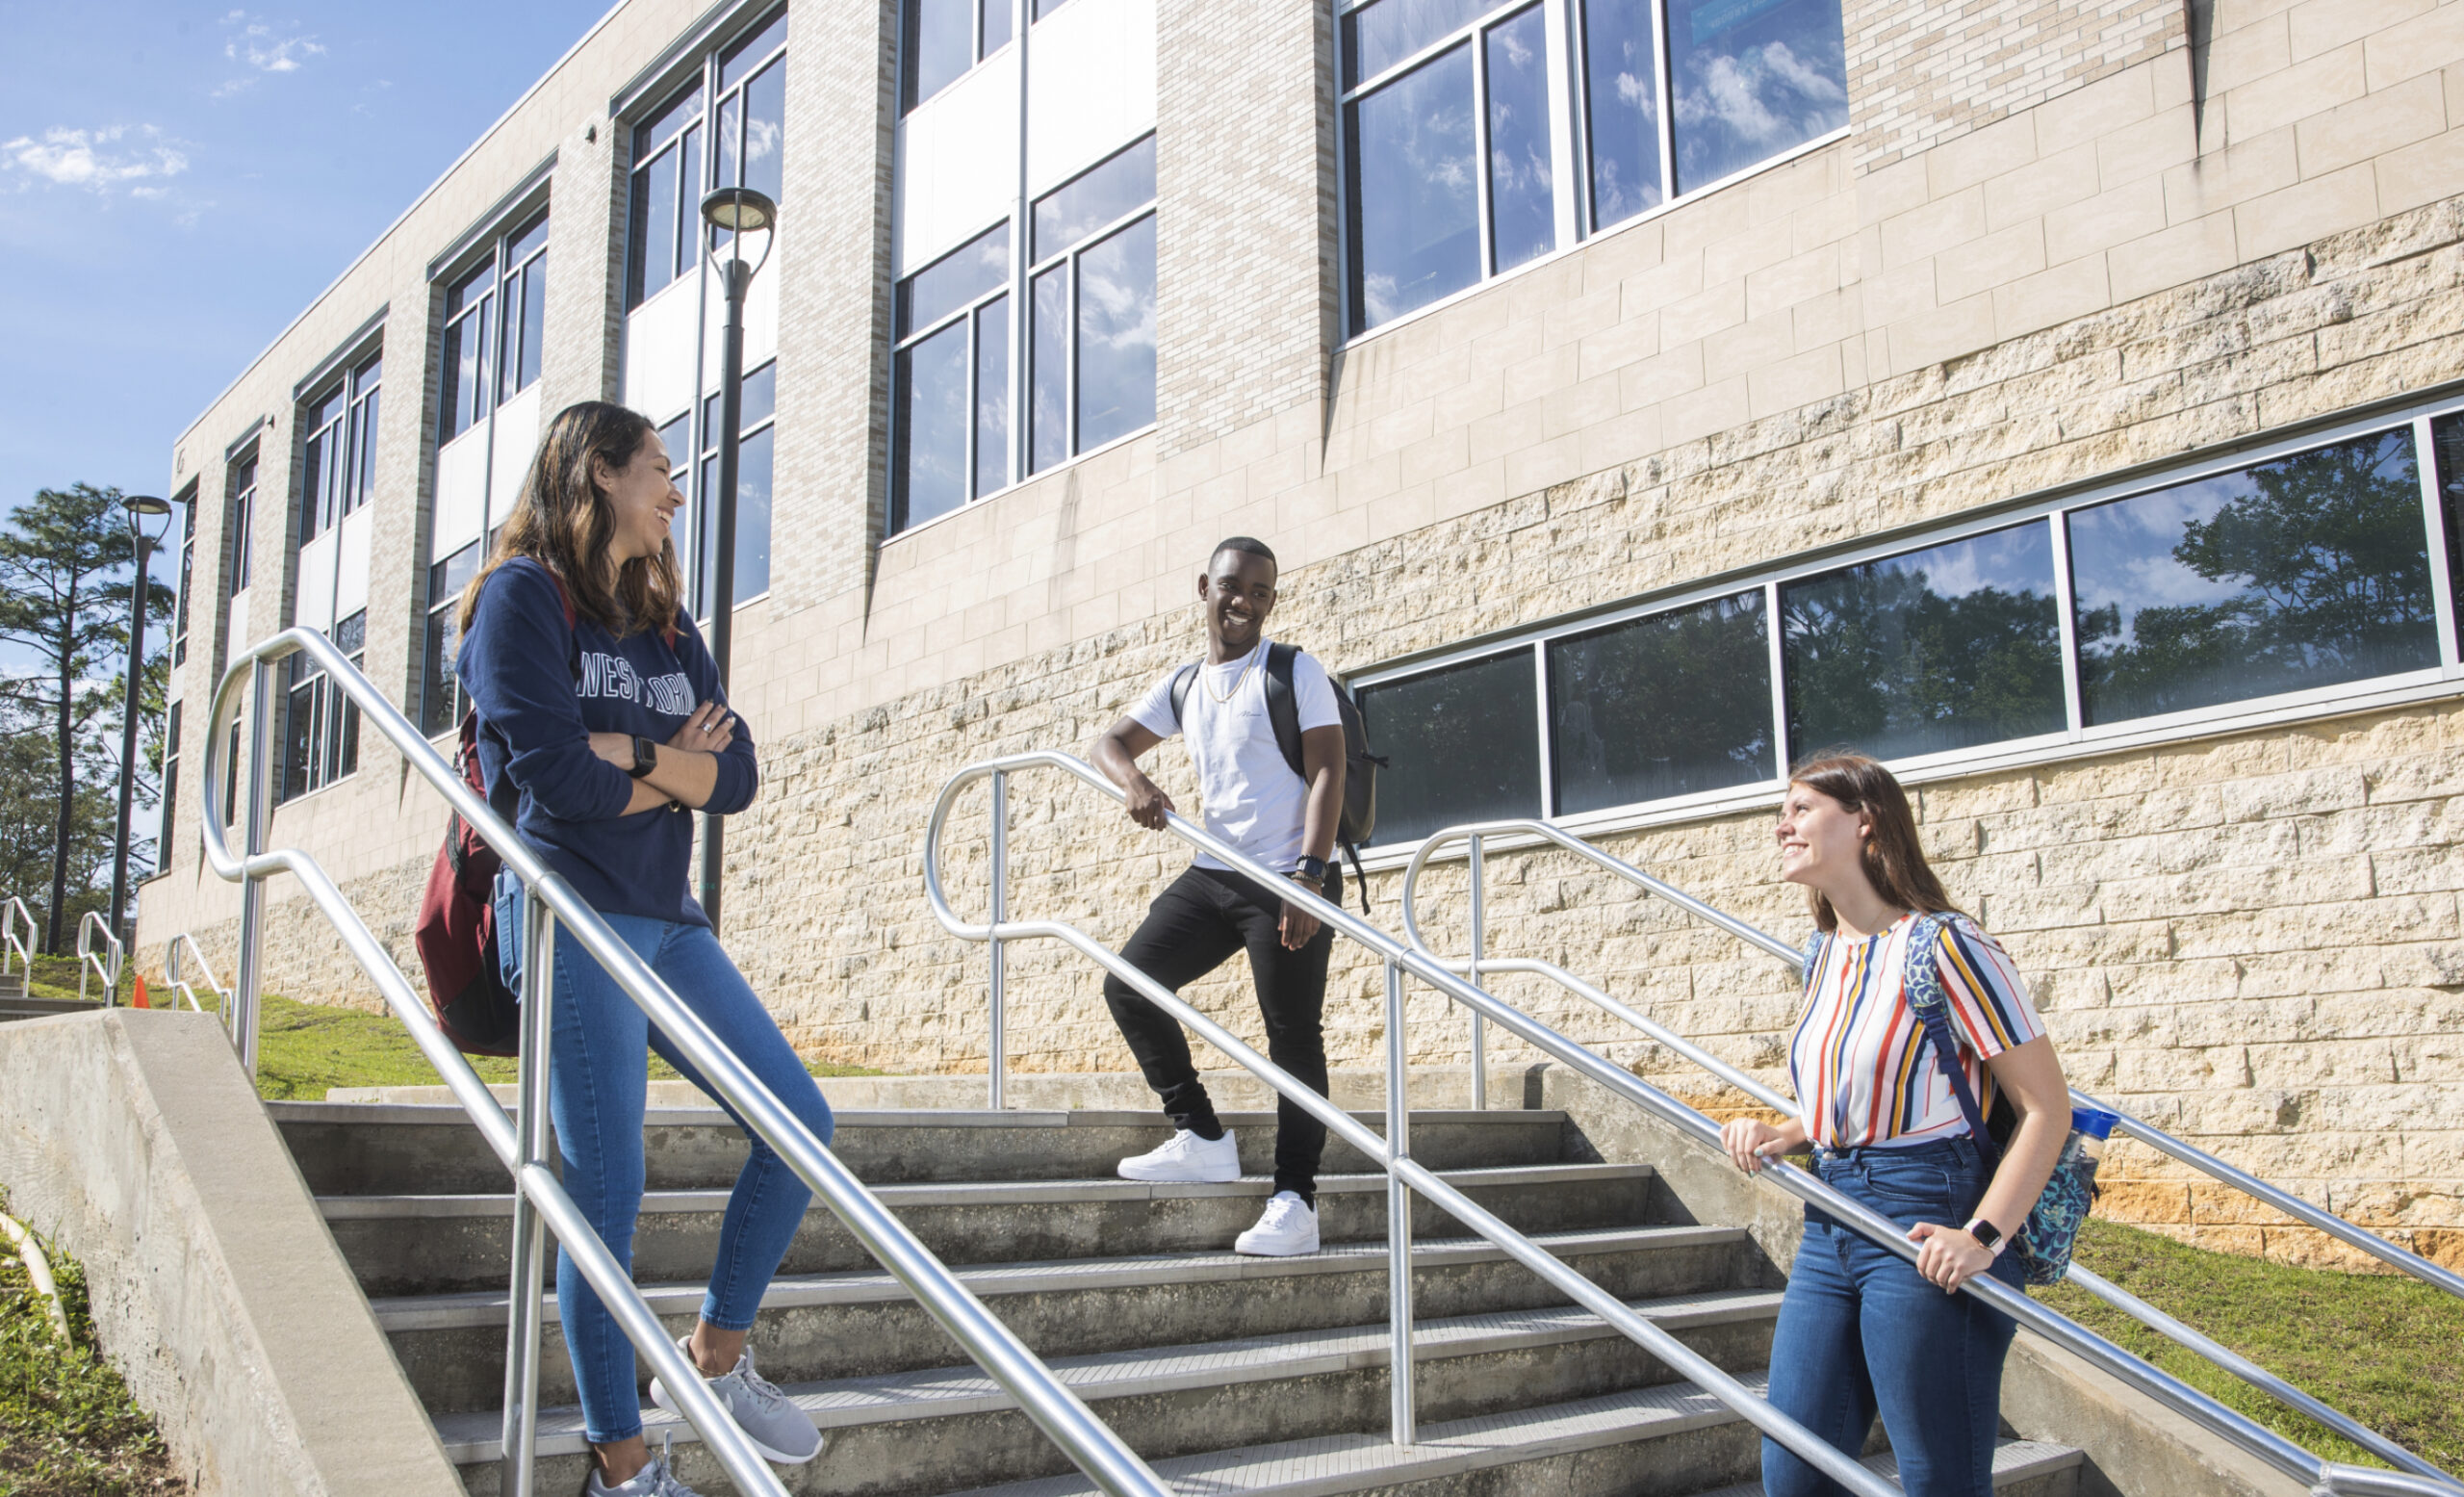 Students socialize between classes responsibly at different locations on the UWF campus.